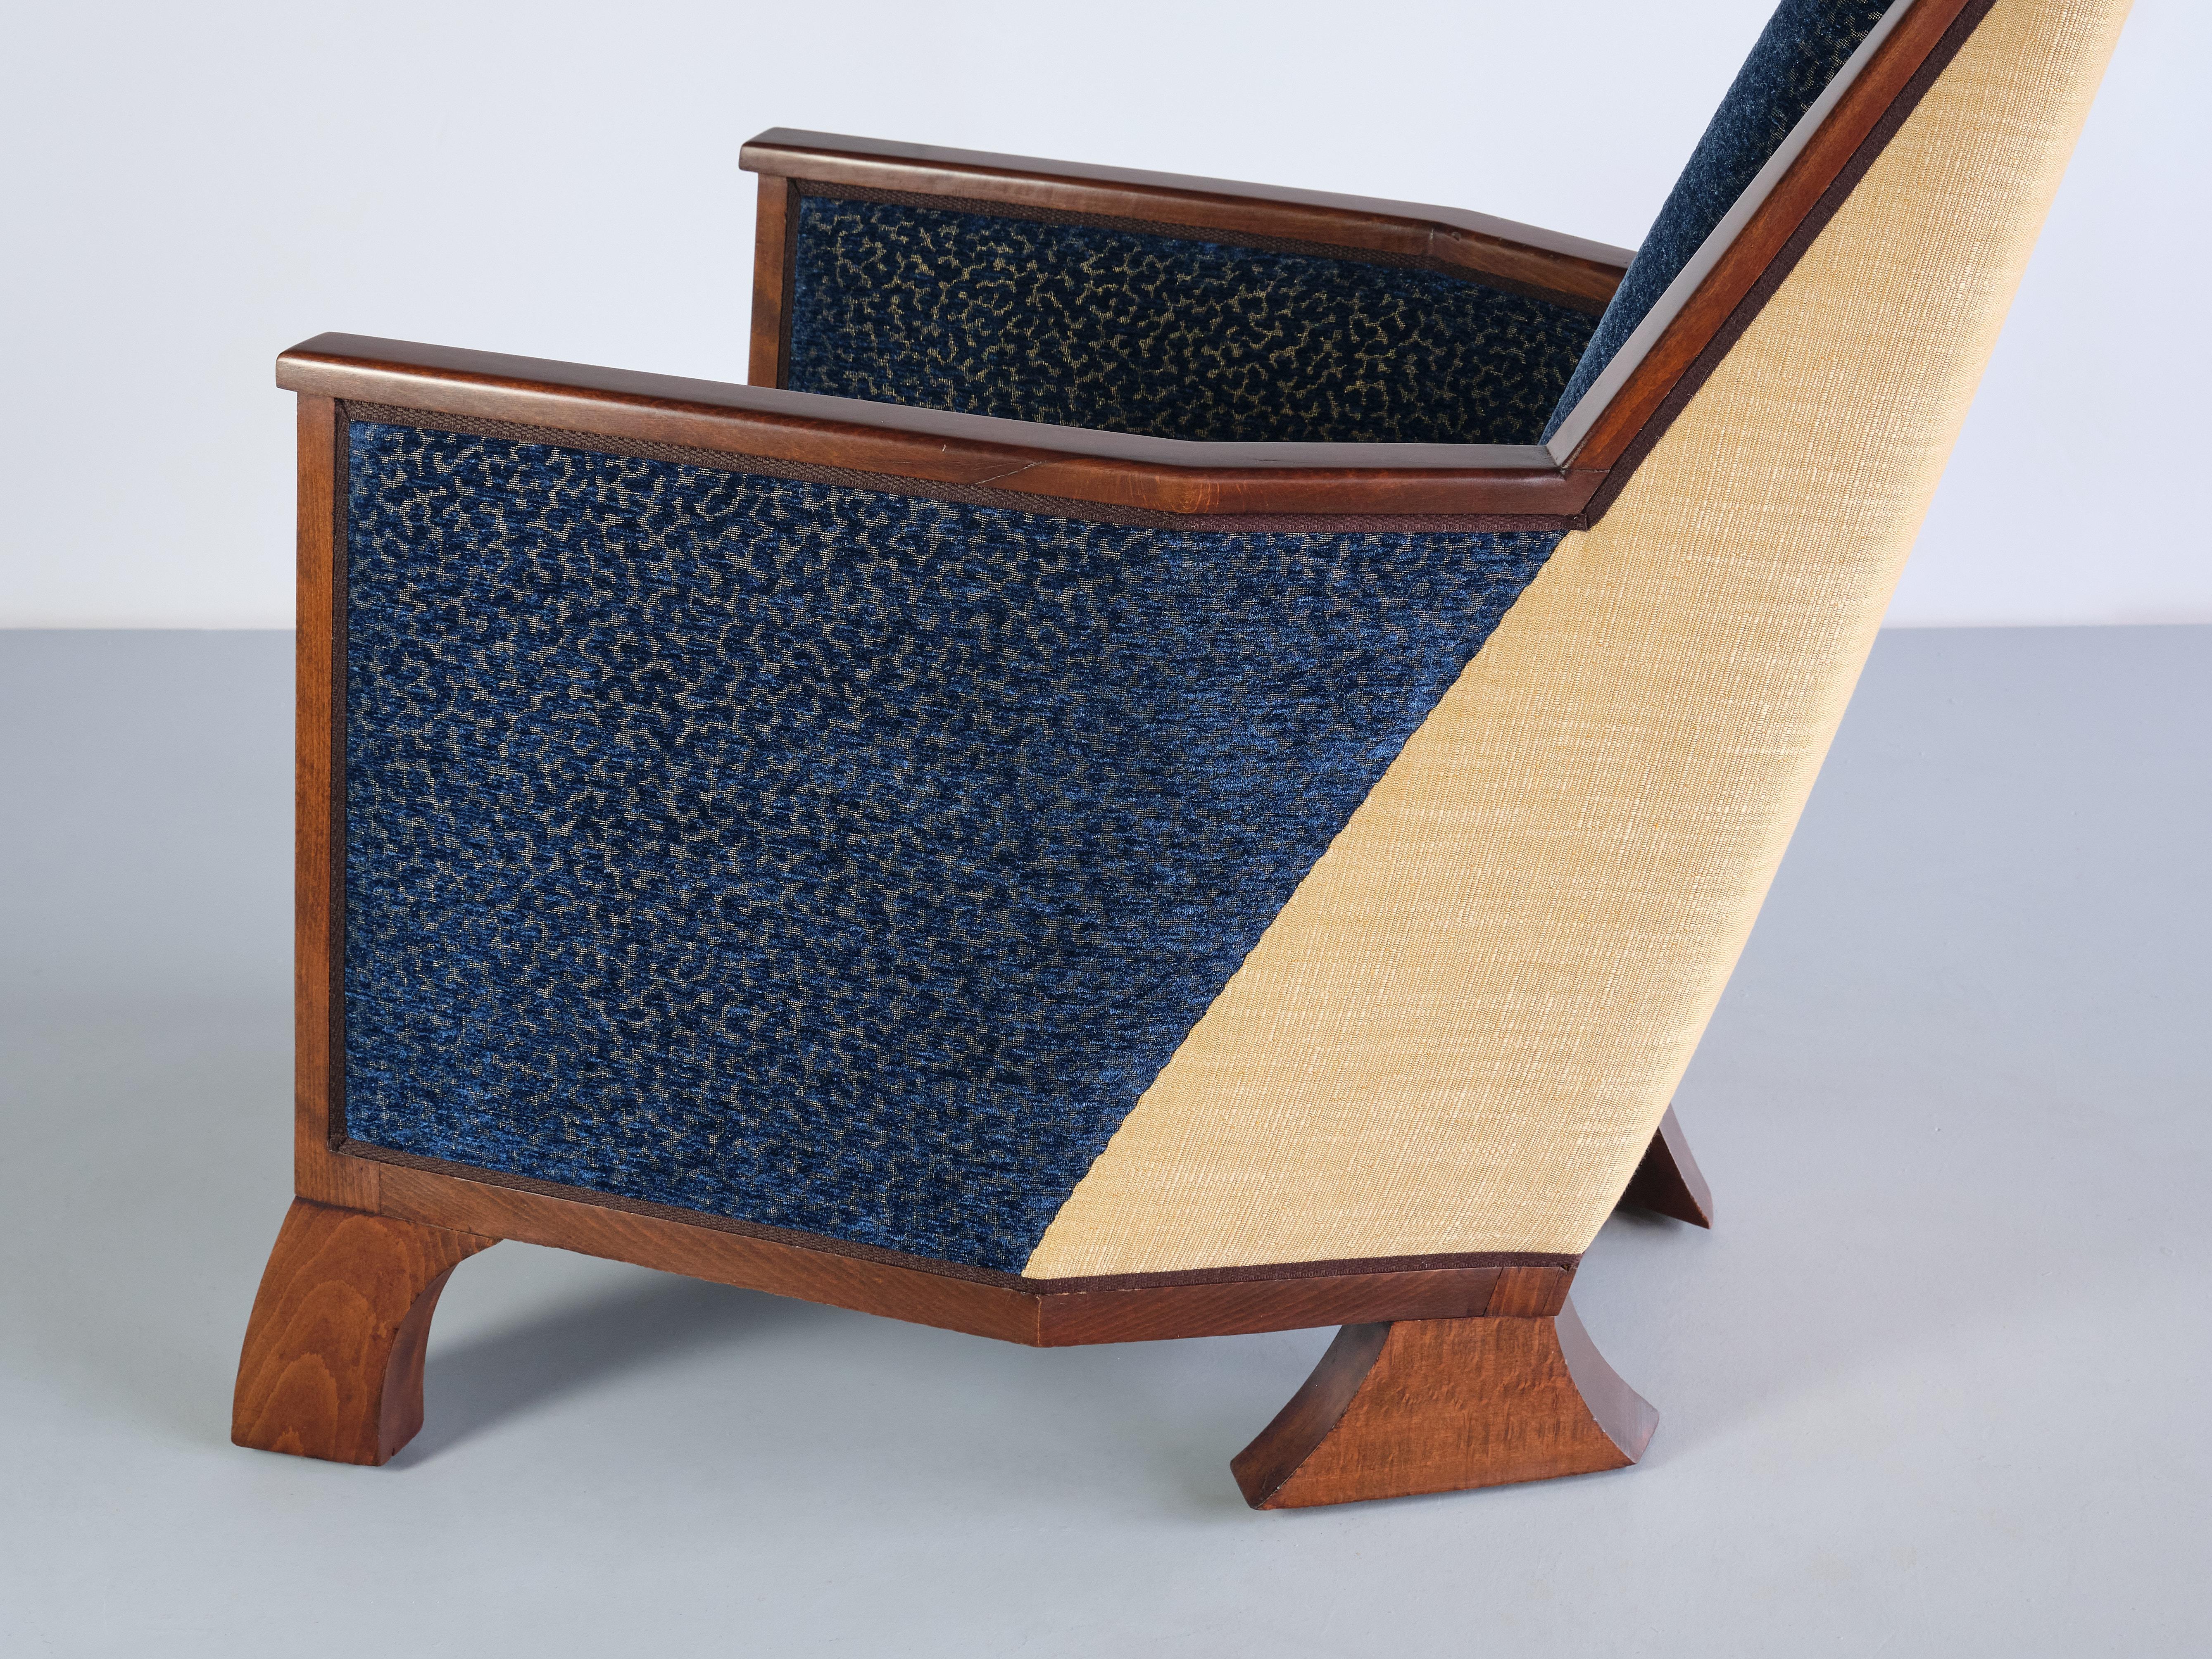 Exceptional Art Deco Arm Chair in Blue Velvet and Maple, Northern France, 1920s For Sale 8